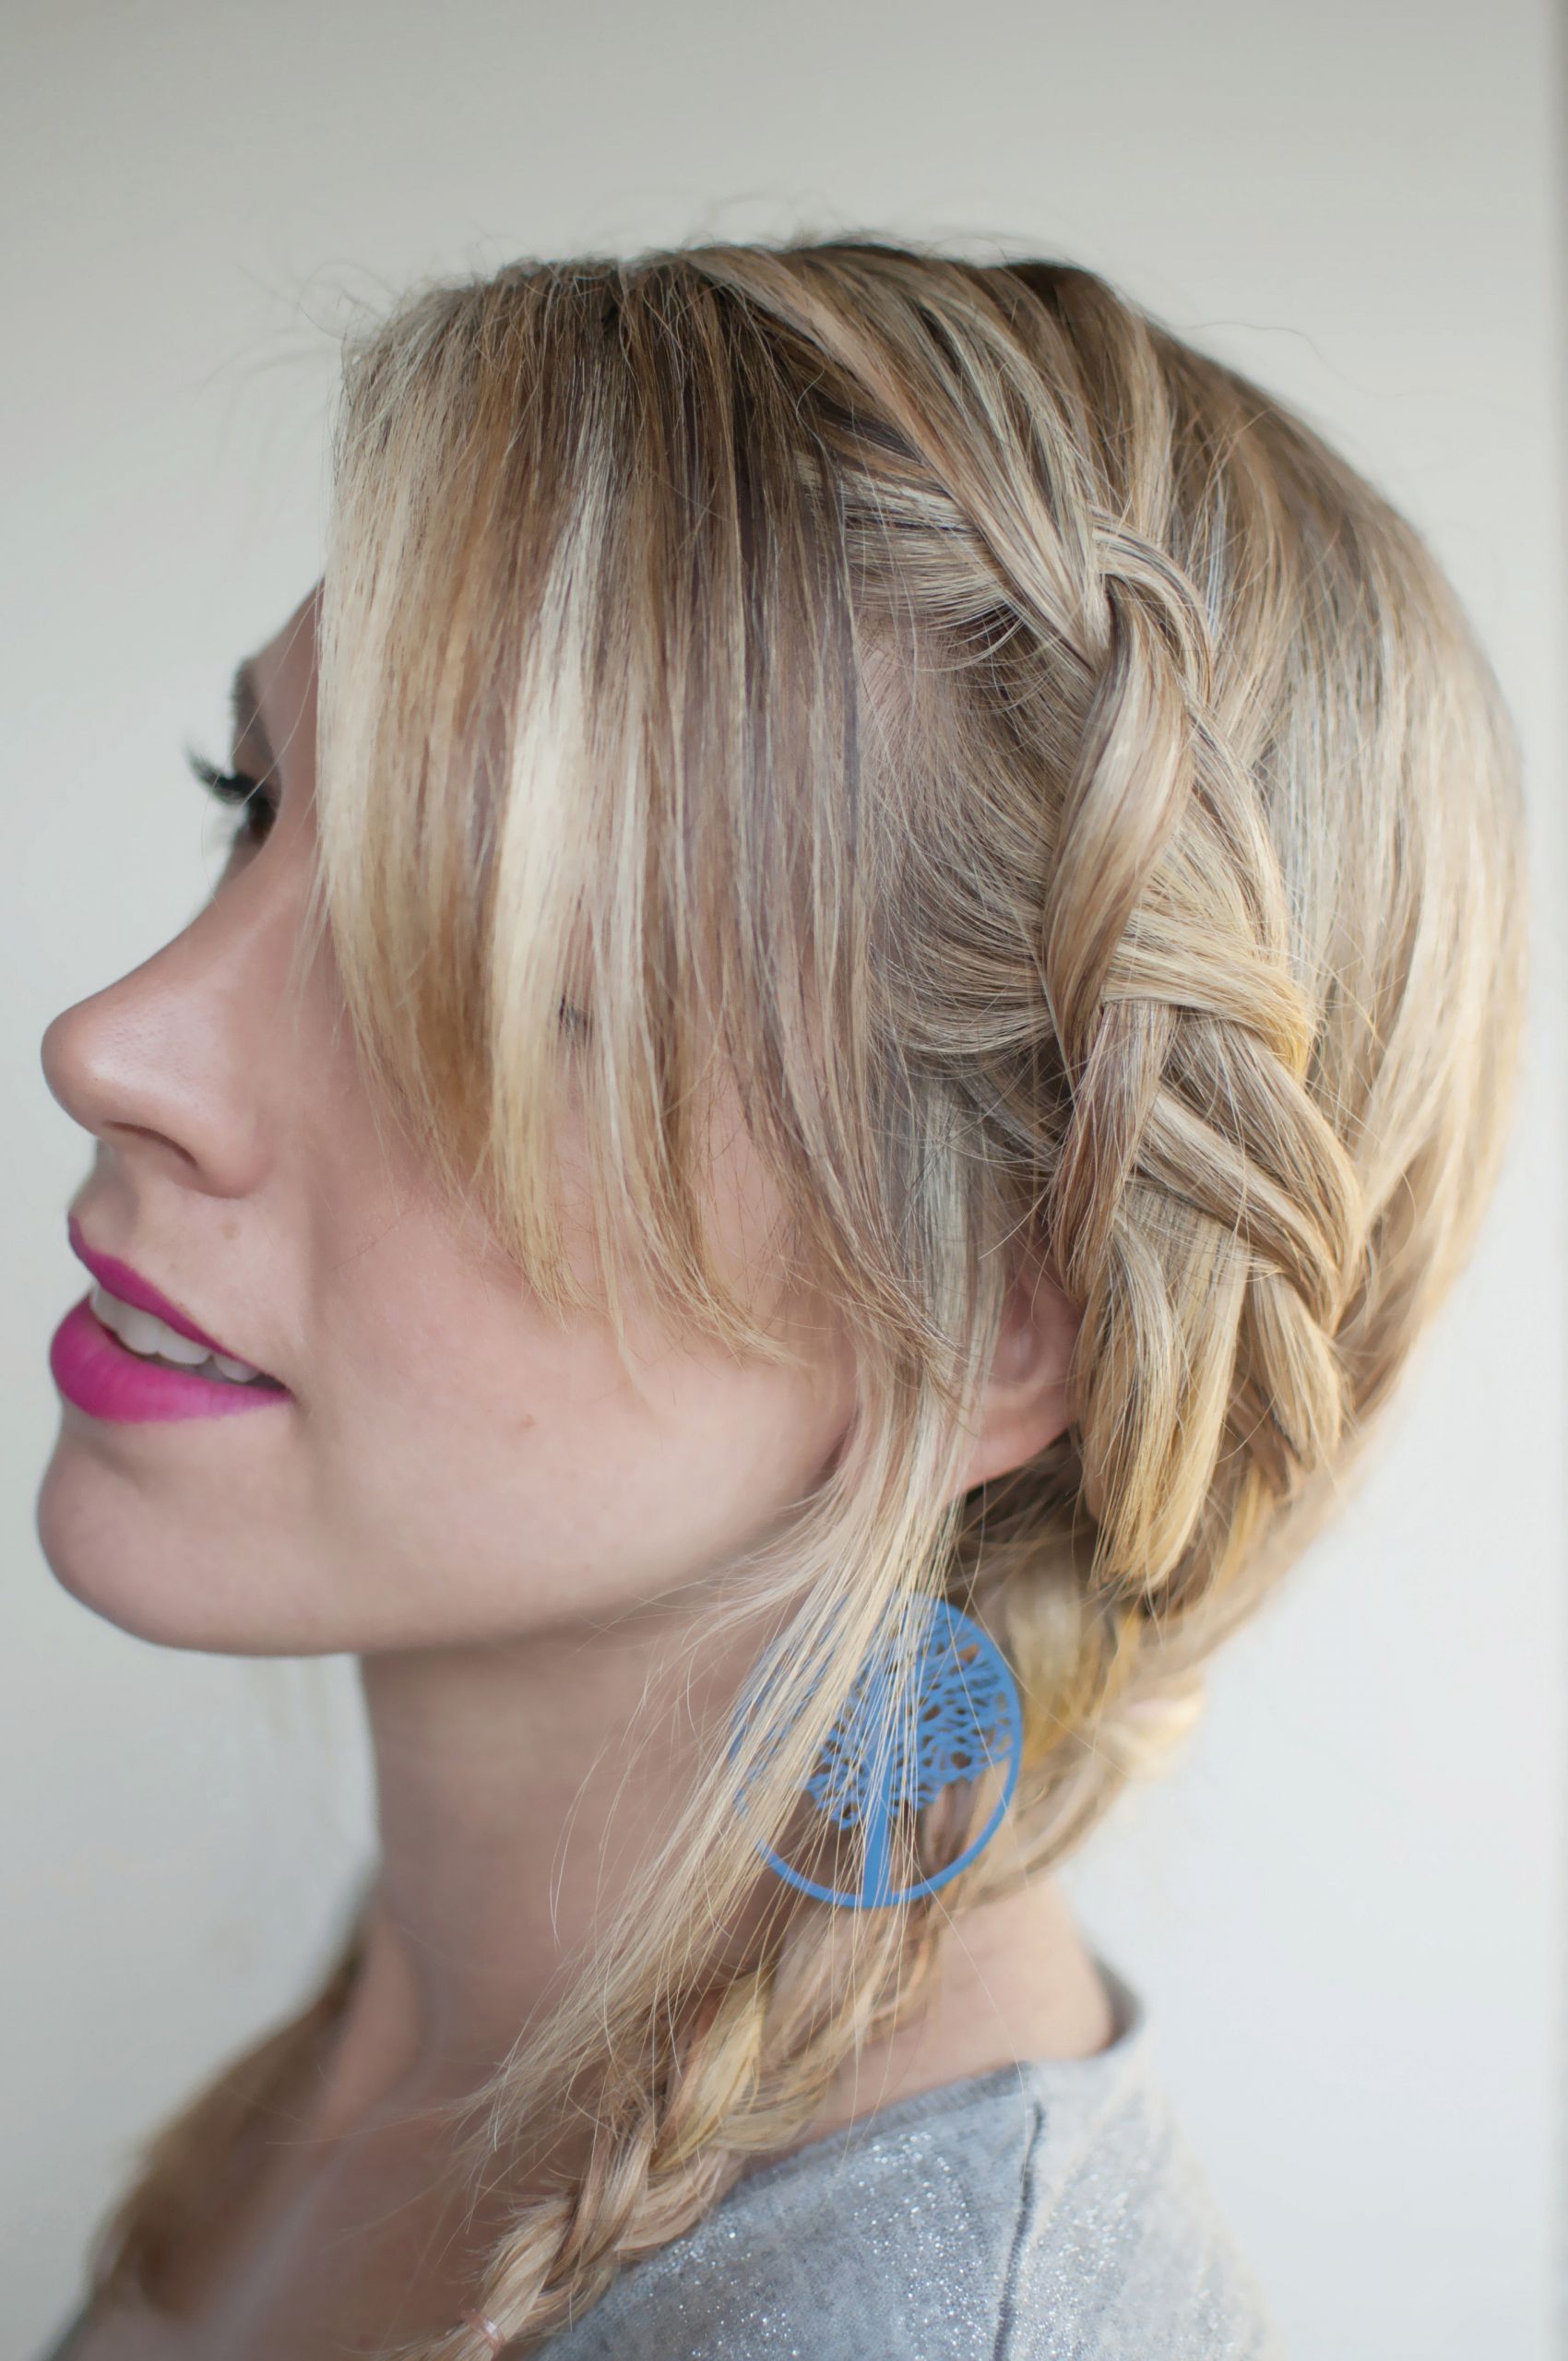 Braided Pigtail Hairstyles
 Pigtail Plaits · Extract from Braids Buns and Twists by